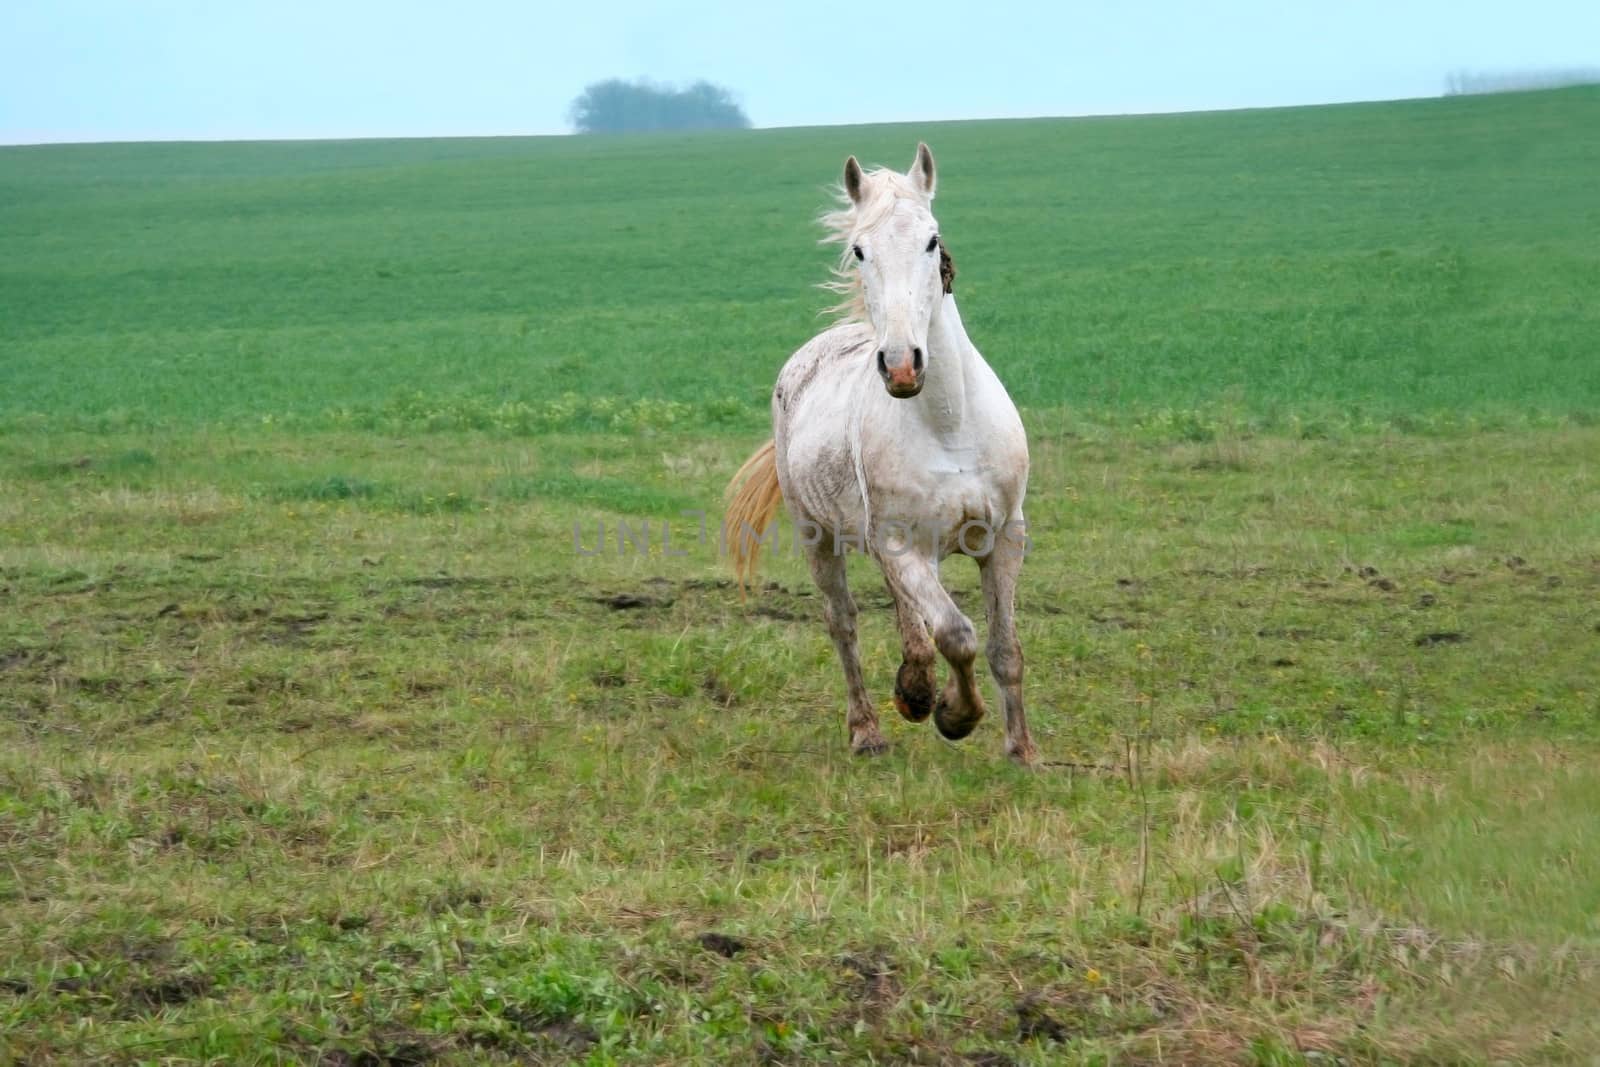 young white horse with a light mane running on a green field